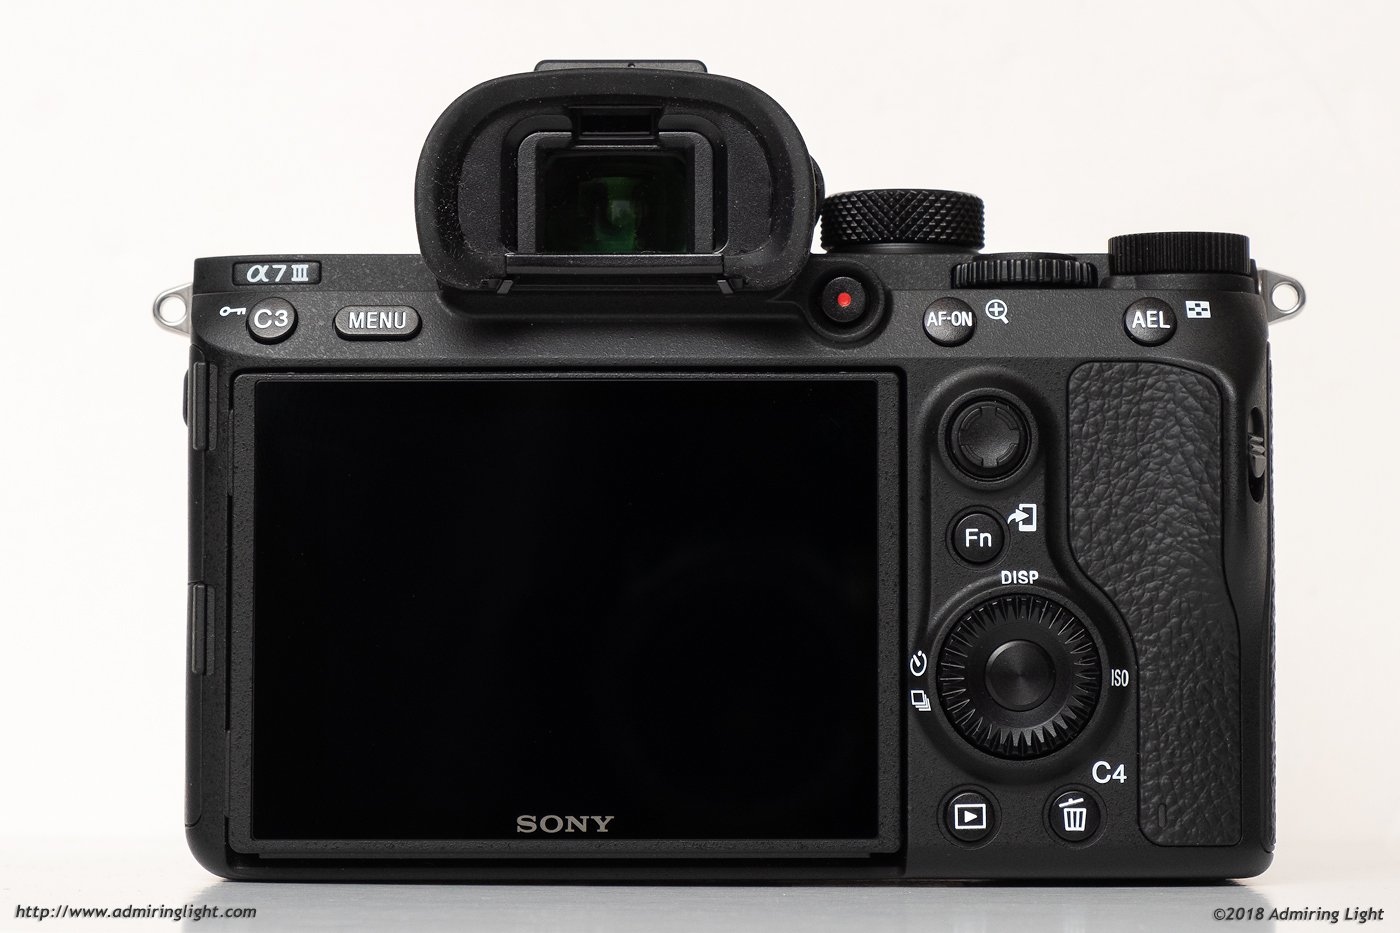 The Rear of the Sony A7 III